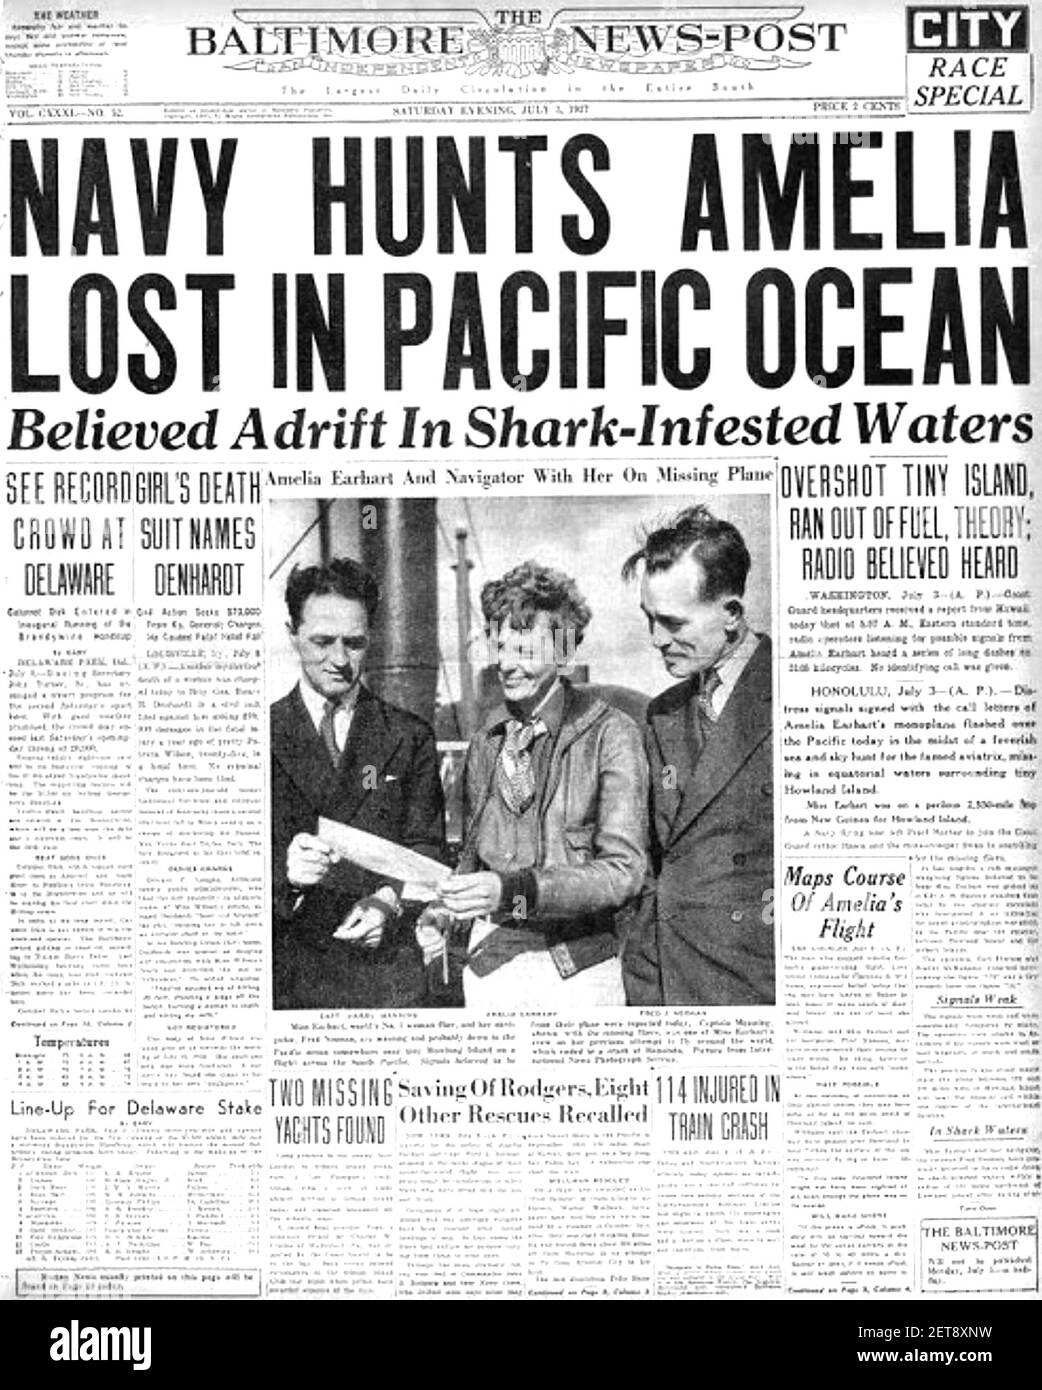 AMELIA EAHART (1897-1937) American aviation pioneer and her navigator Fred Noonan disappeared over the central Pacific in July 1937. Stock Photo